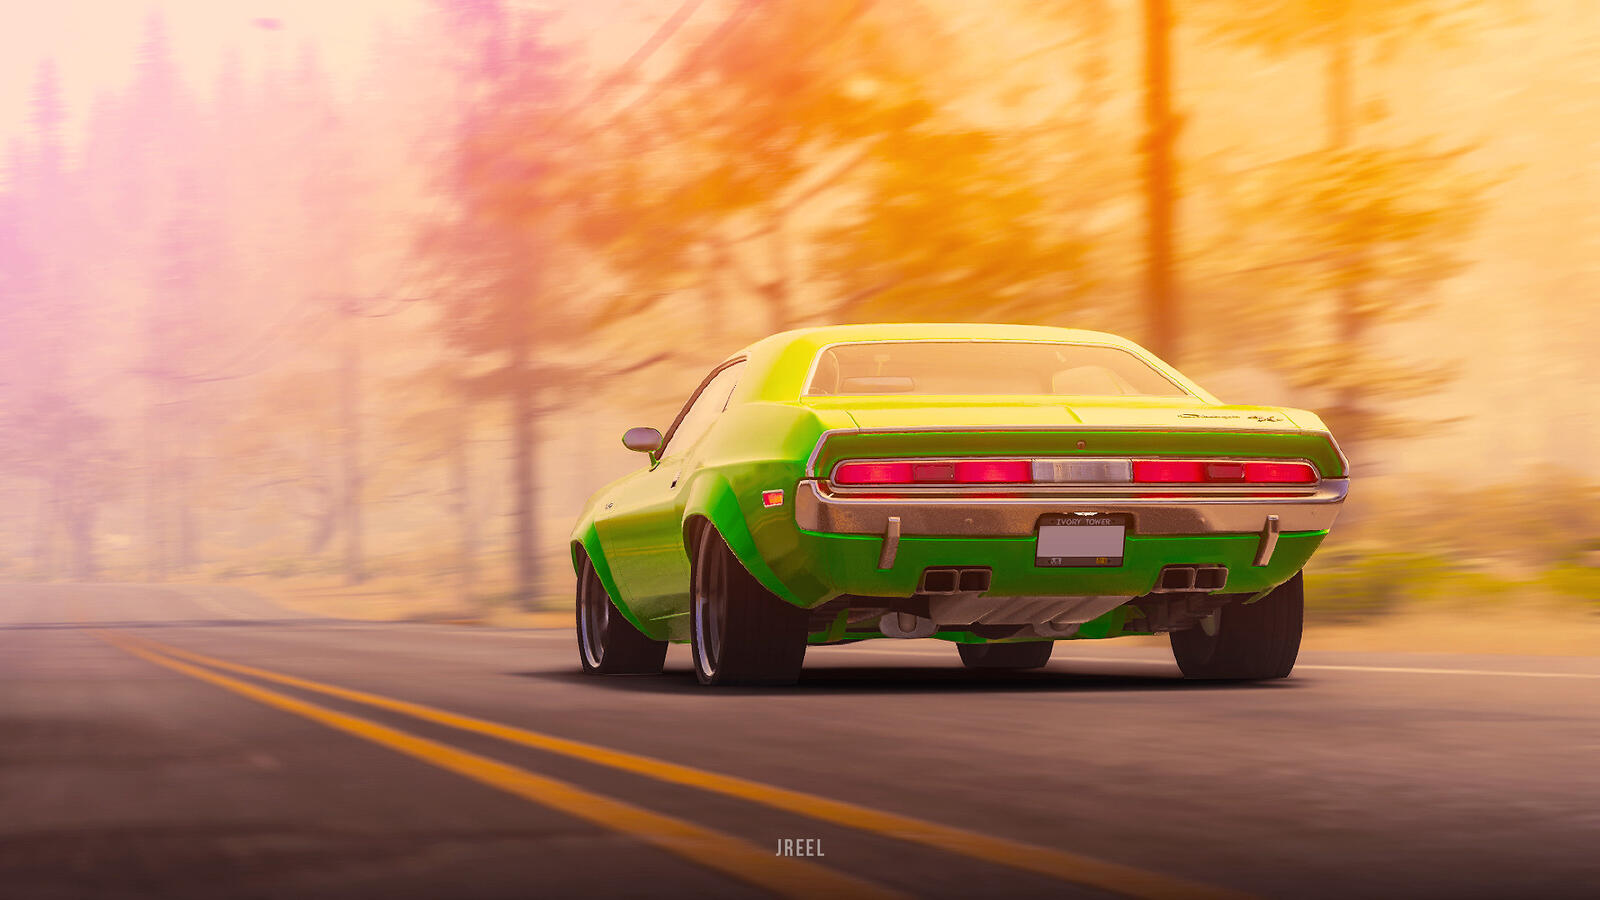 Wallpapers the crew Dodge Xbox games on the desktop